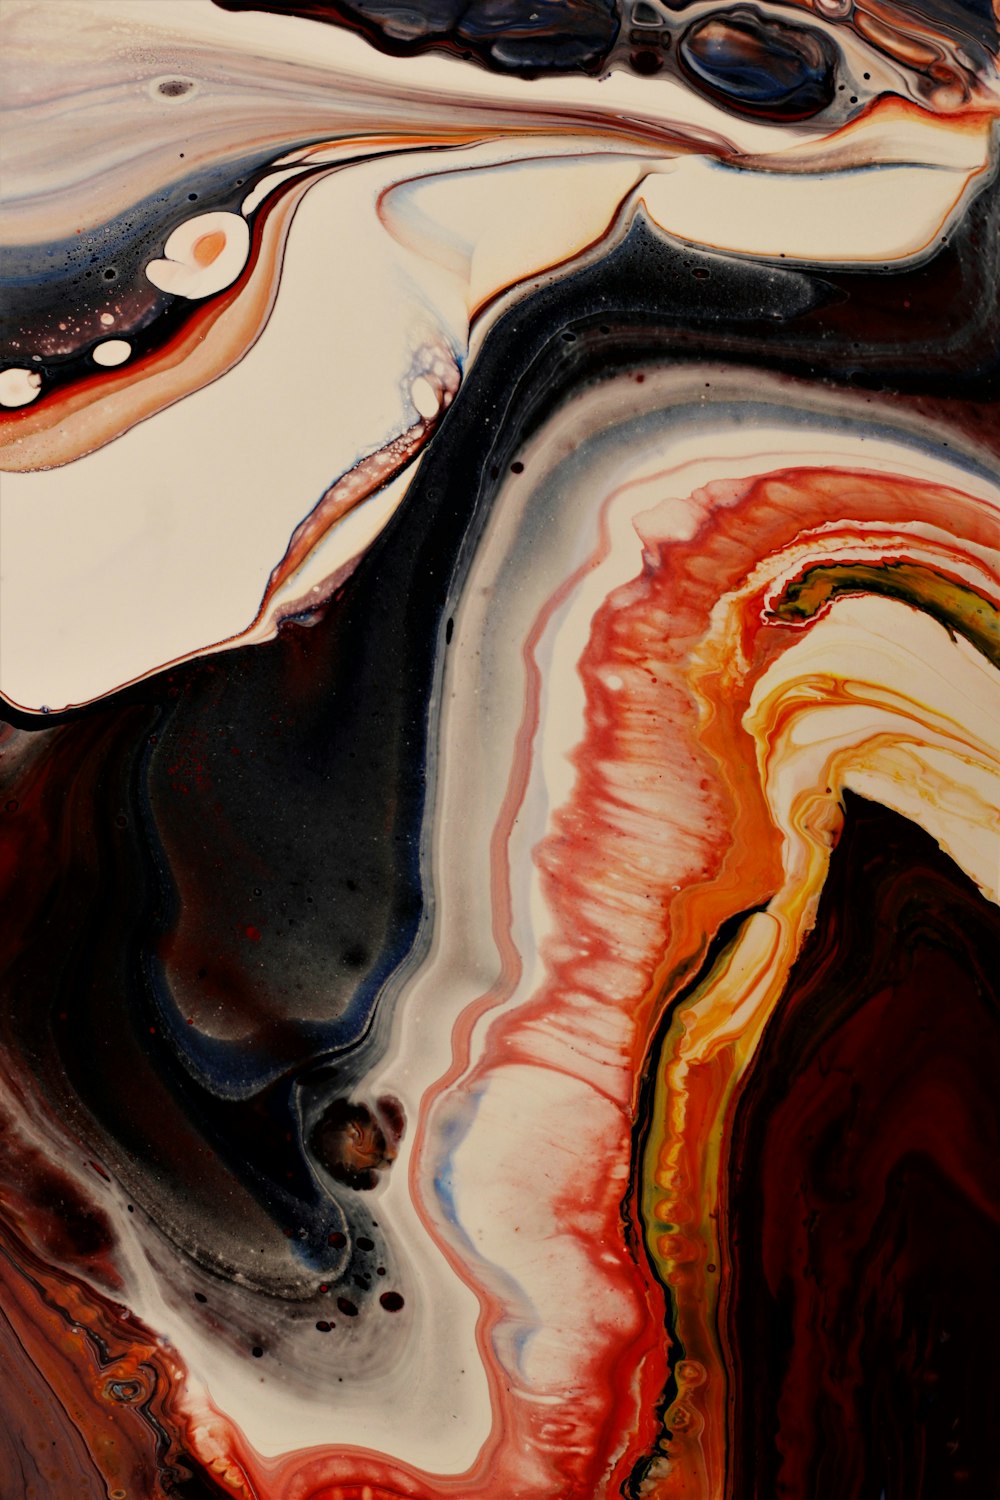 a close up of an abstract painting with different colors